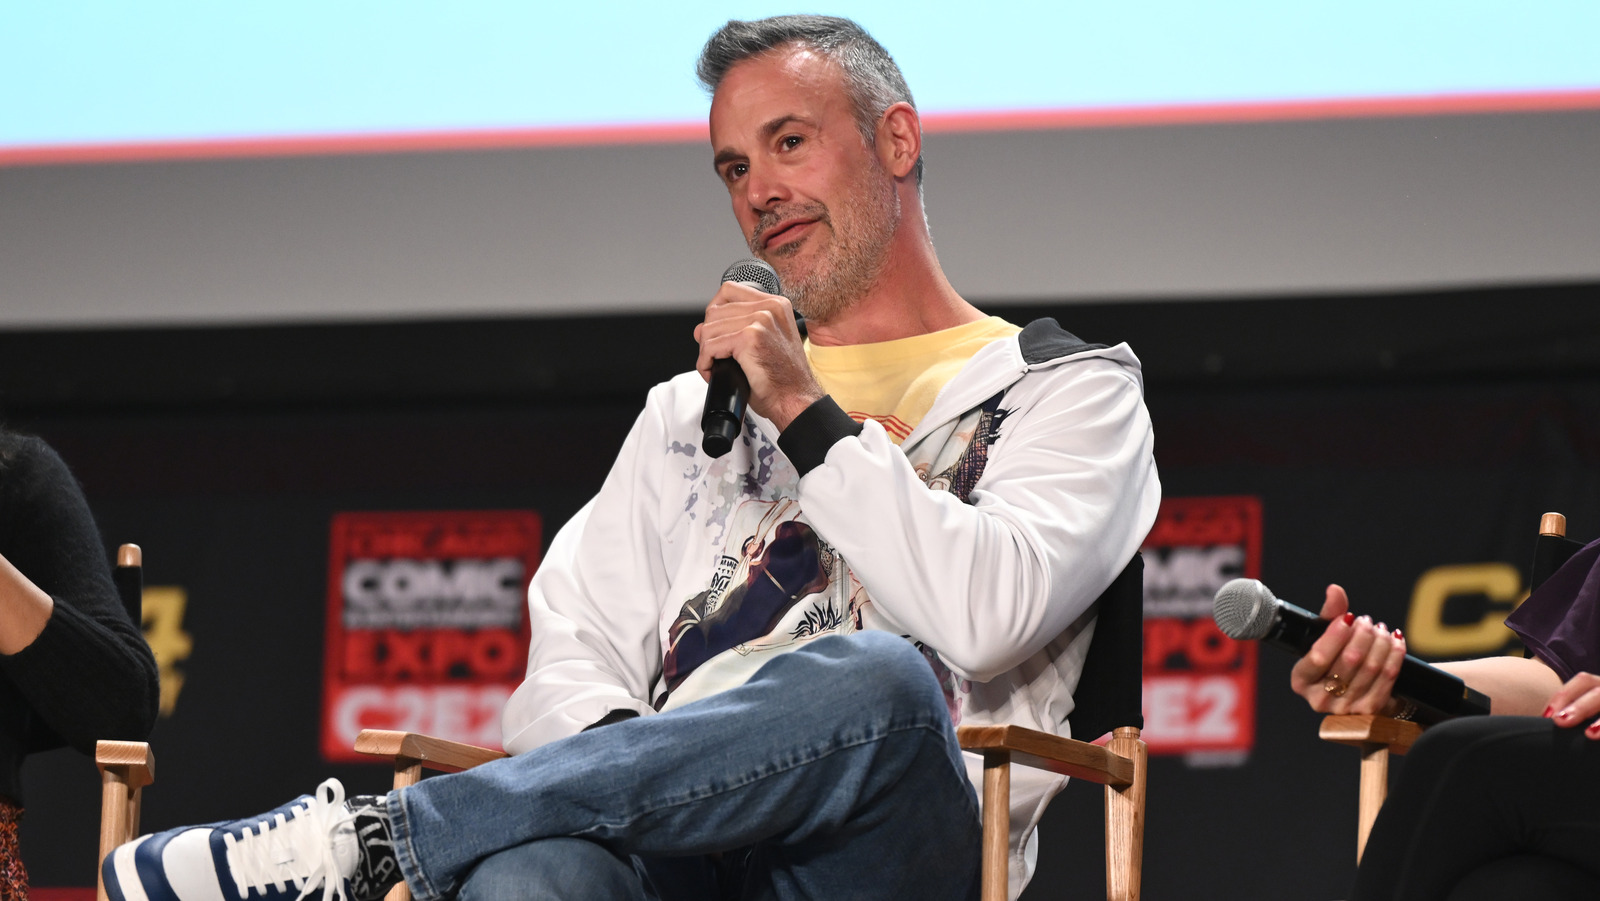 Freddie Prinze Jr. Shares Concerns About Current AEW Storyline For The Elite